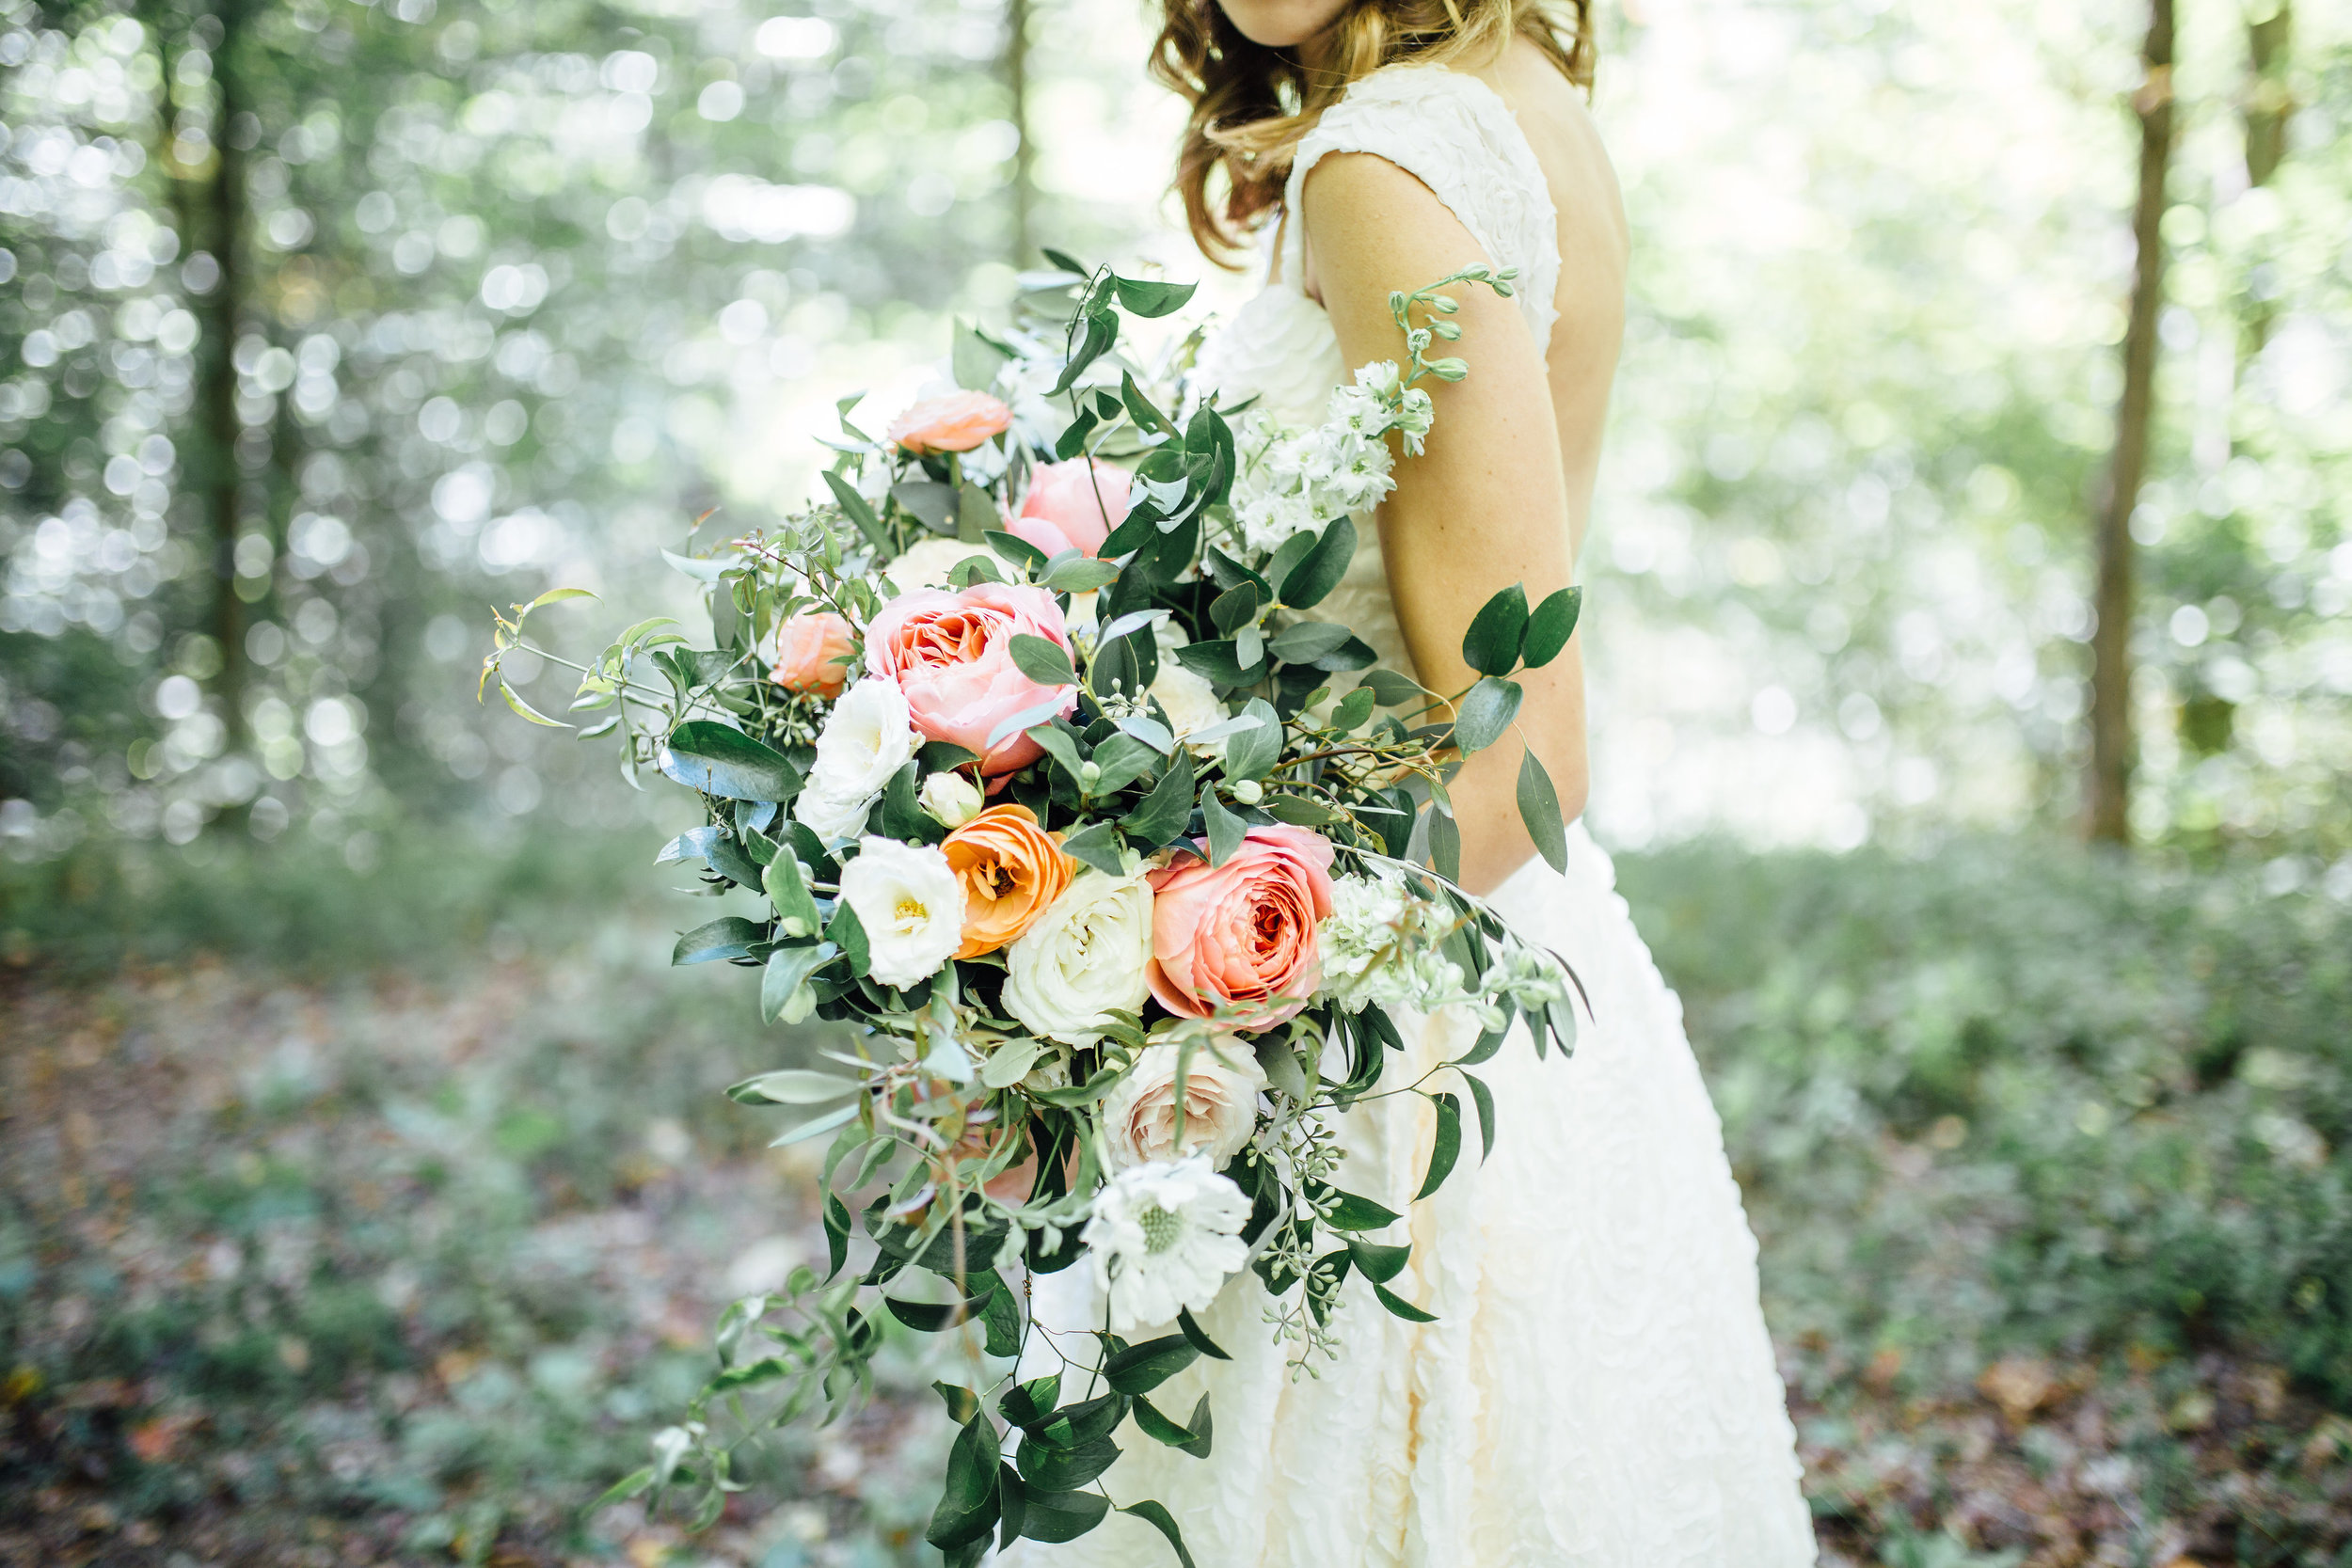 Natural, organic bridal bouquet with garden roses and ranunculus // Southern Wedding Florist